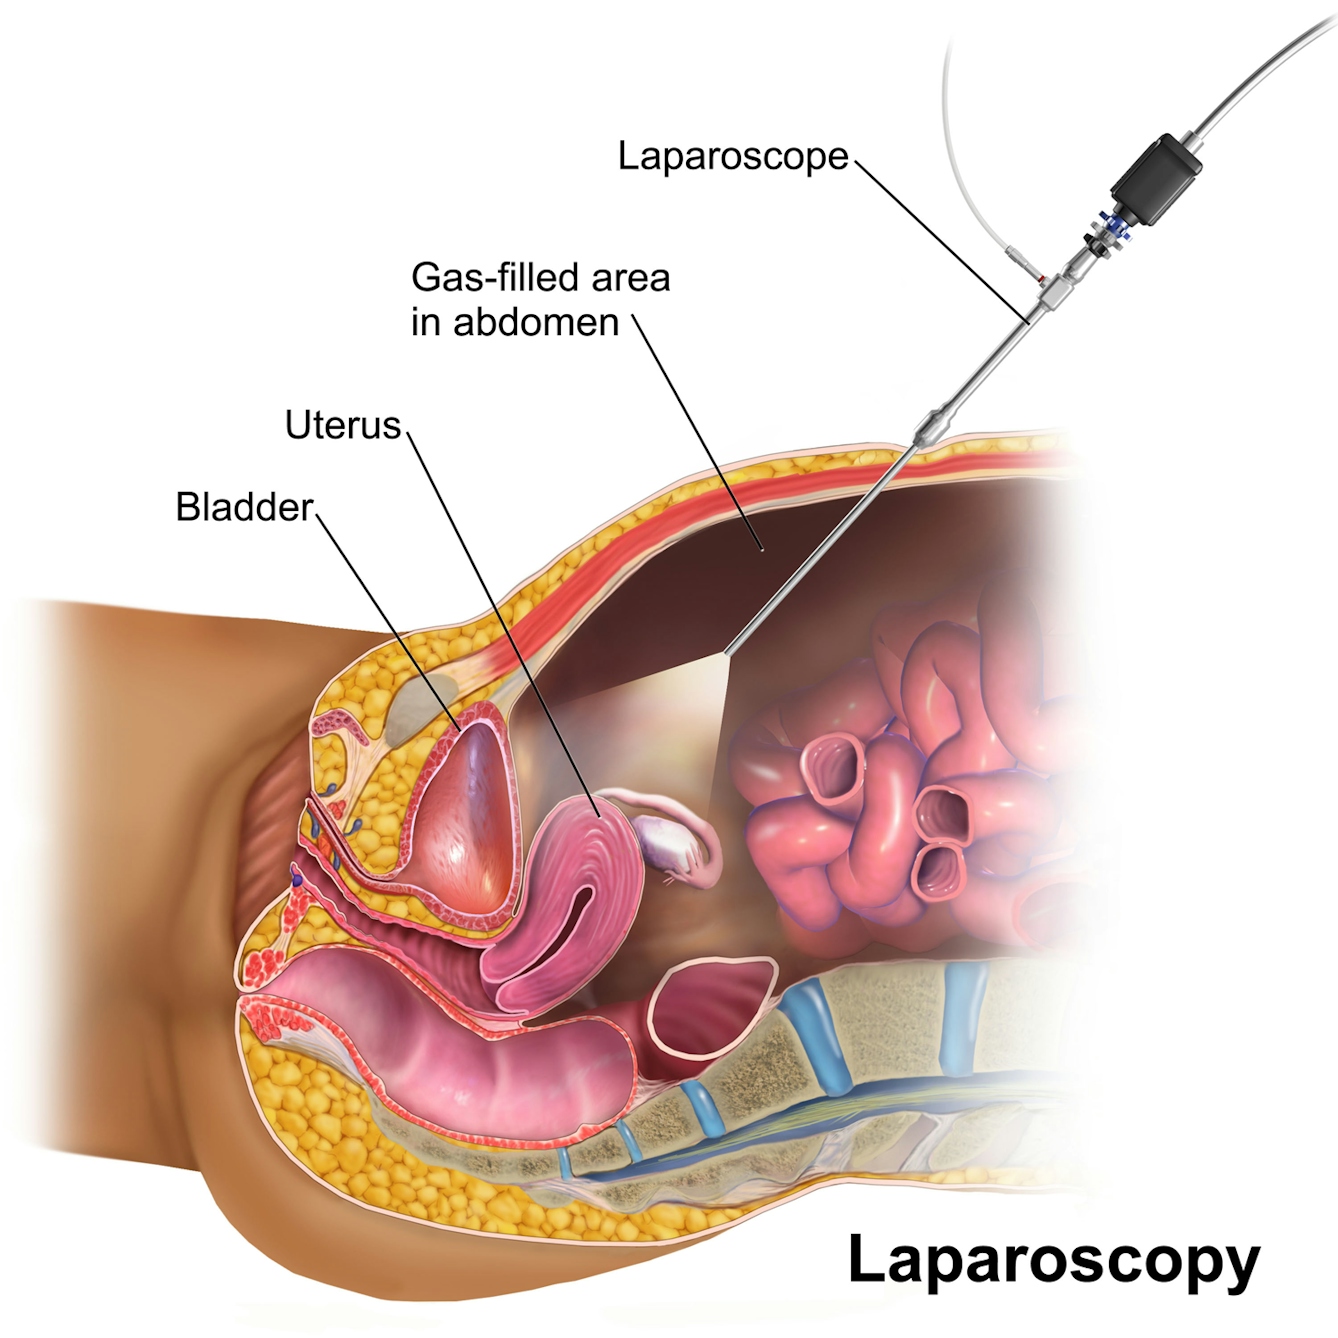 Vector graphic showing a laparoscopy with a laparoscope inserted into the gas-filled space in the abdomen and pointing towards the uterus and bladder.